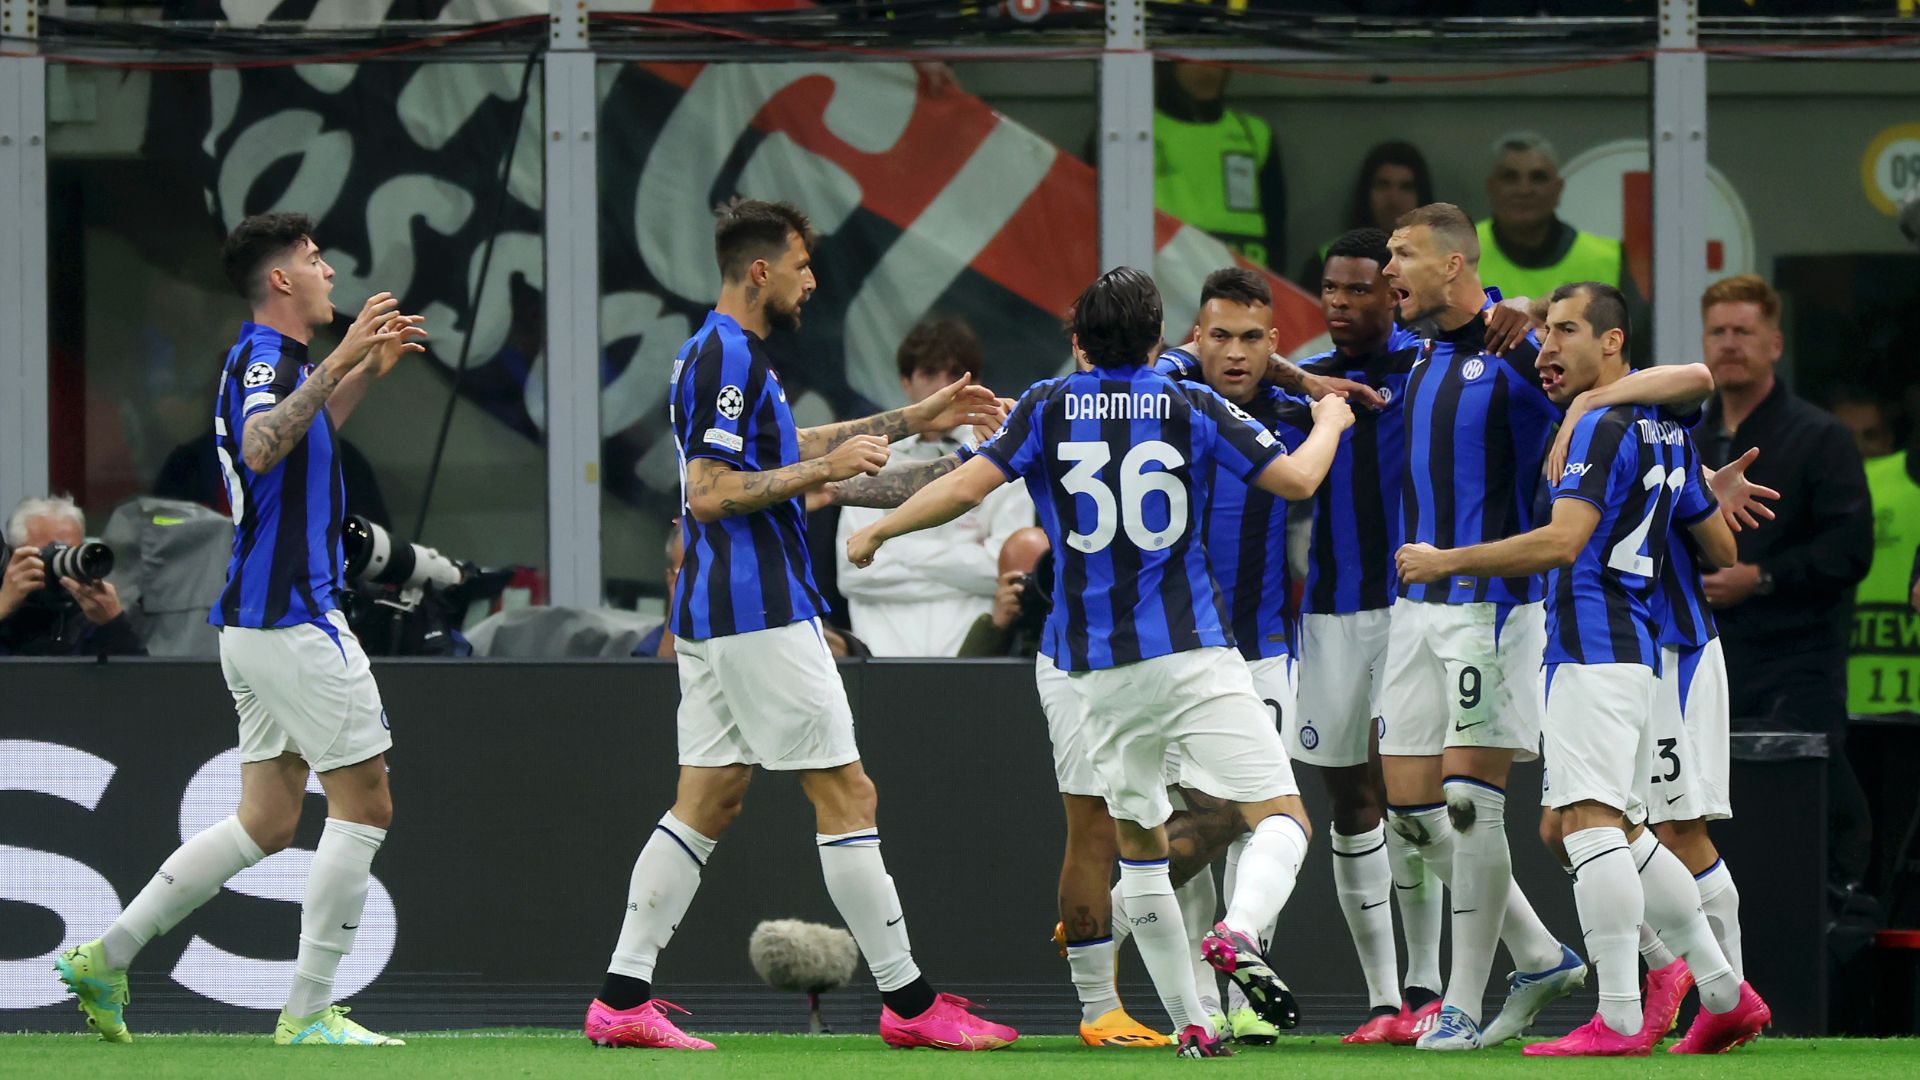 Inter Milan beat Milan in the first leg of the semifinal, by the score of 2-0 (Credit: Getty Images)